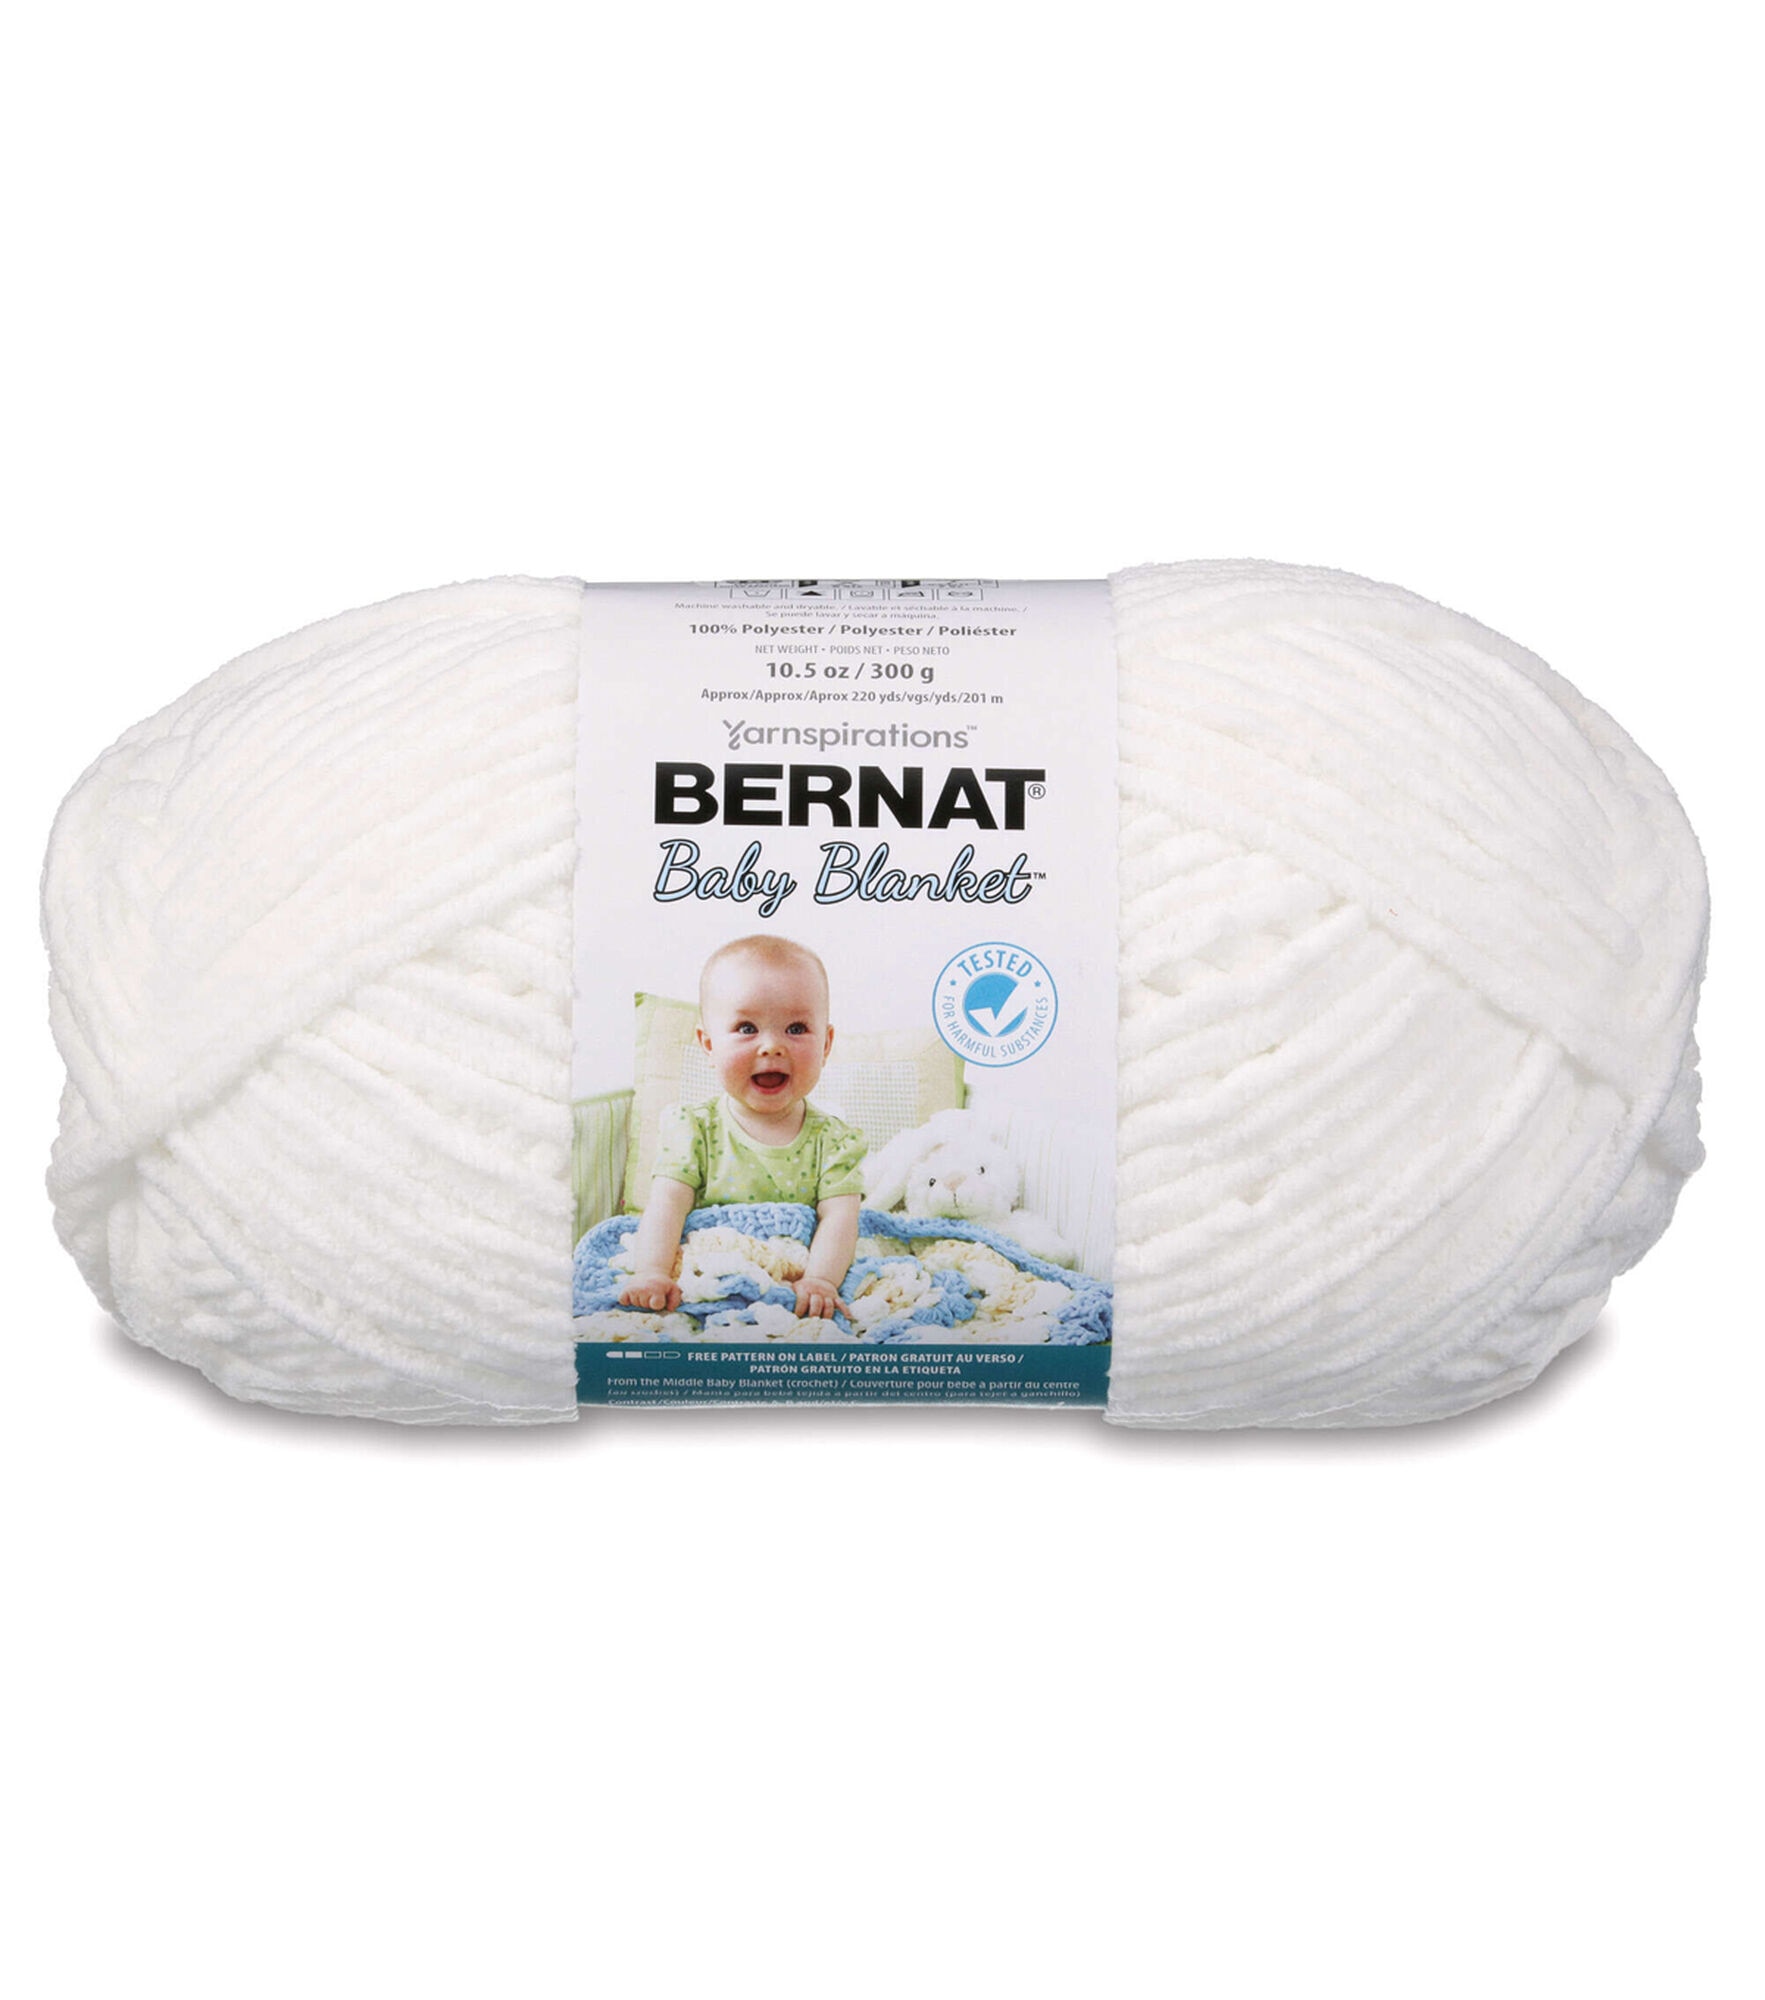 Bernat Baby Blanket Yarn - Big Ball (10.5 oz) - 2 Pack with Pattern Cards  in Color (Misty Jungle Green)